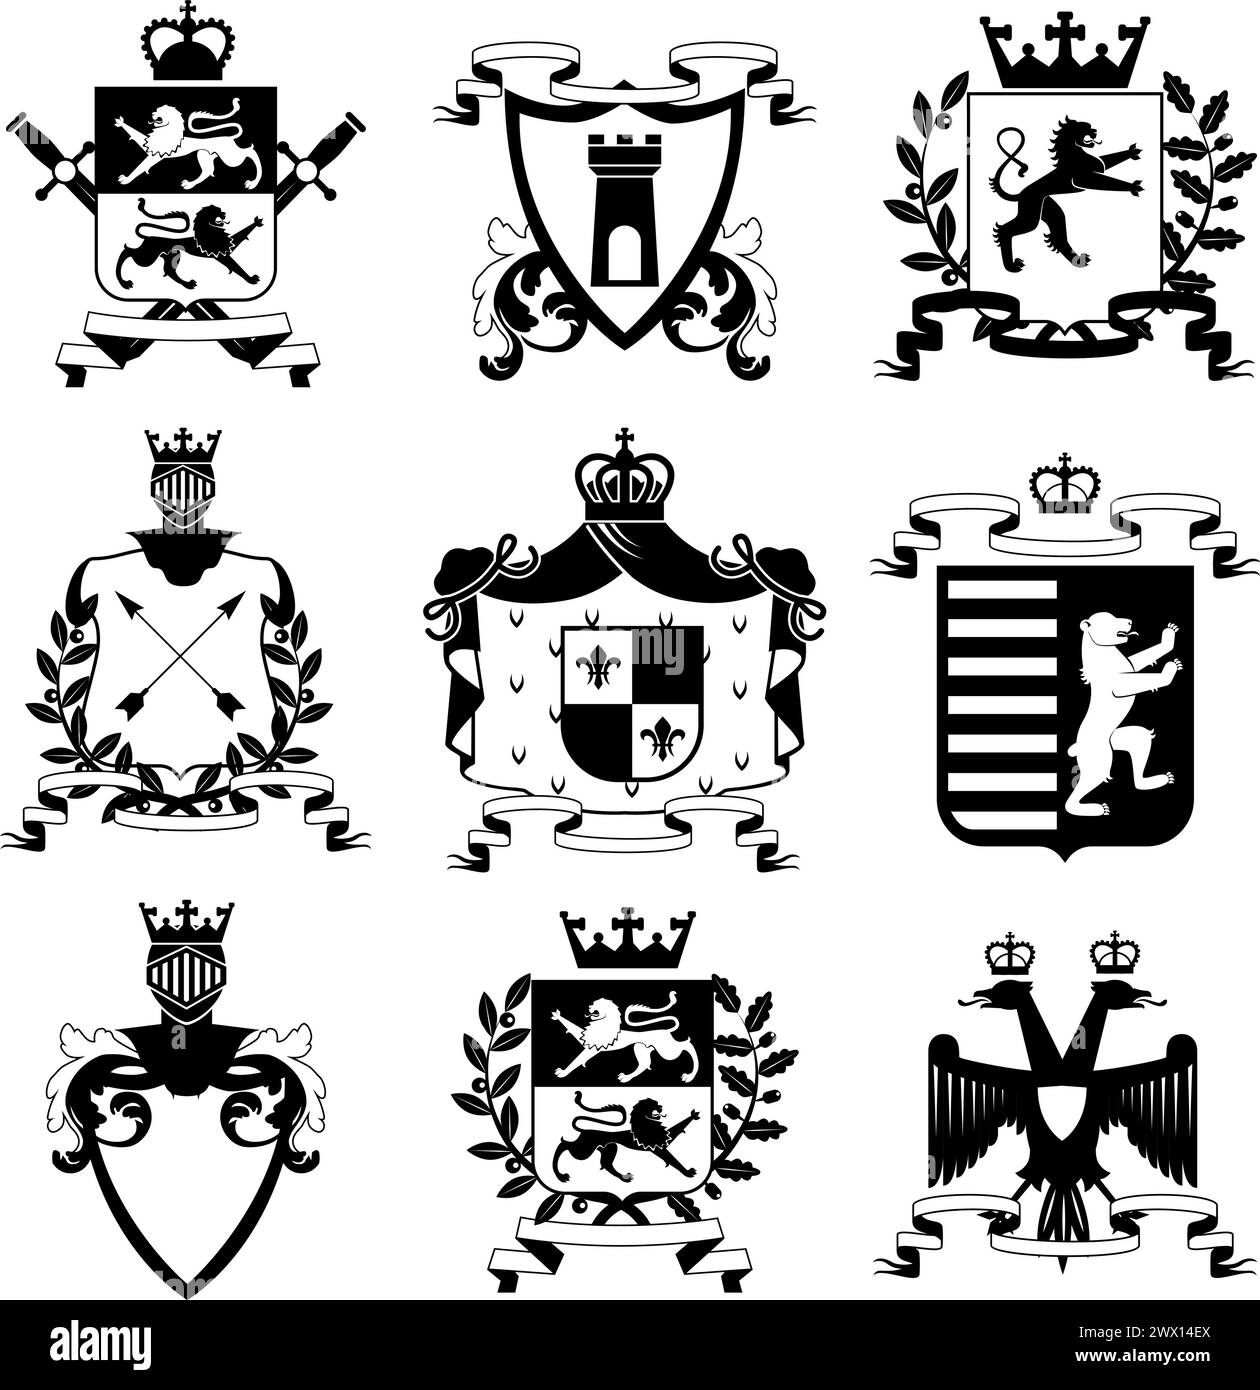 Heraldic coat of arms family crest and shields emblems design black icons collection abstract isolated vector illustration Stock Vector